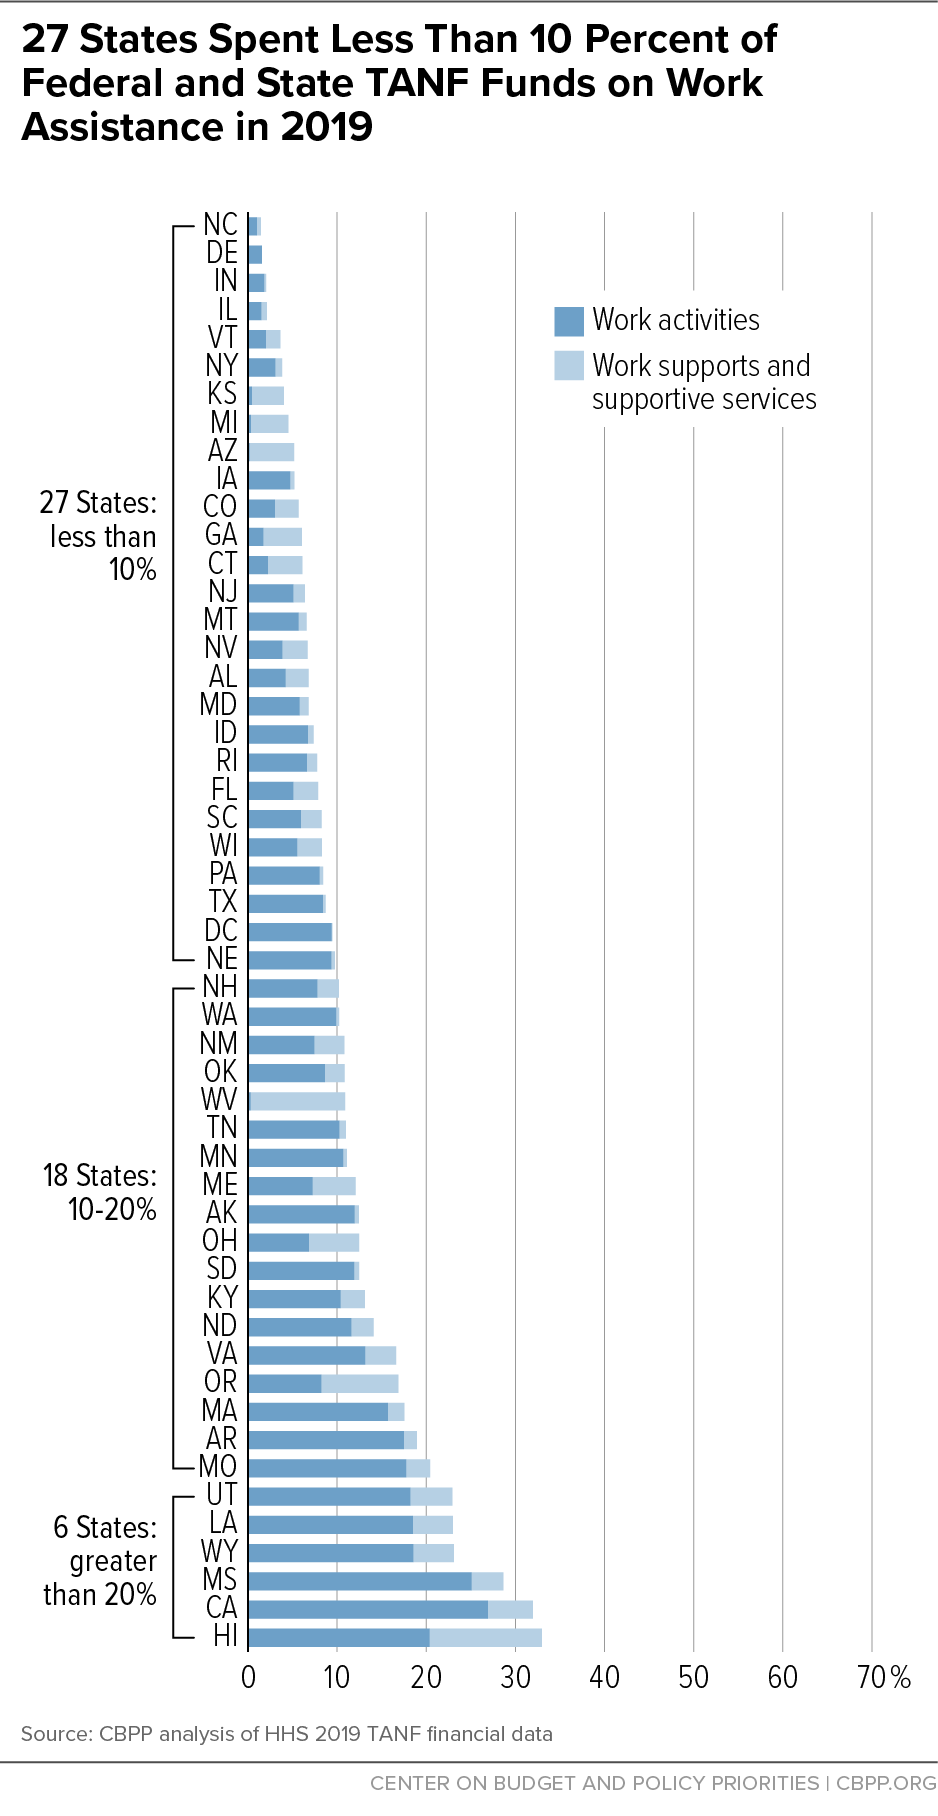 27 States Spent Less Than 10 Percent of Federal and State TANF Funds on Work Assistance in 2019 